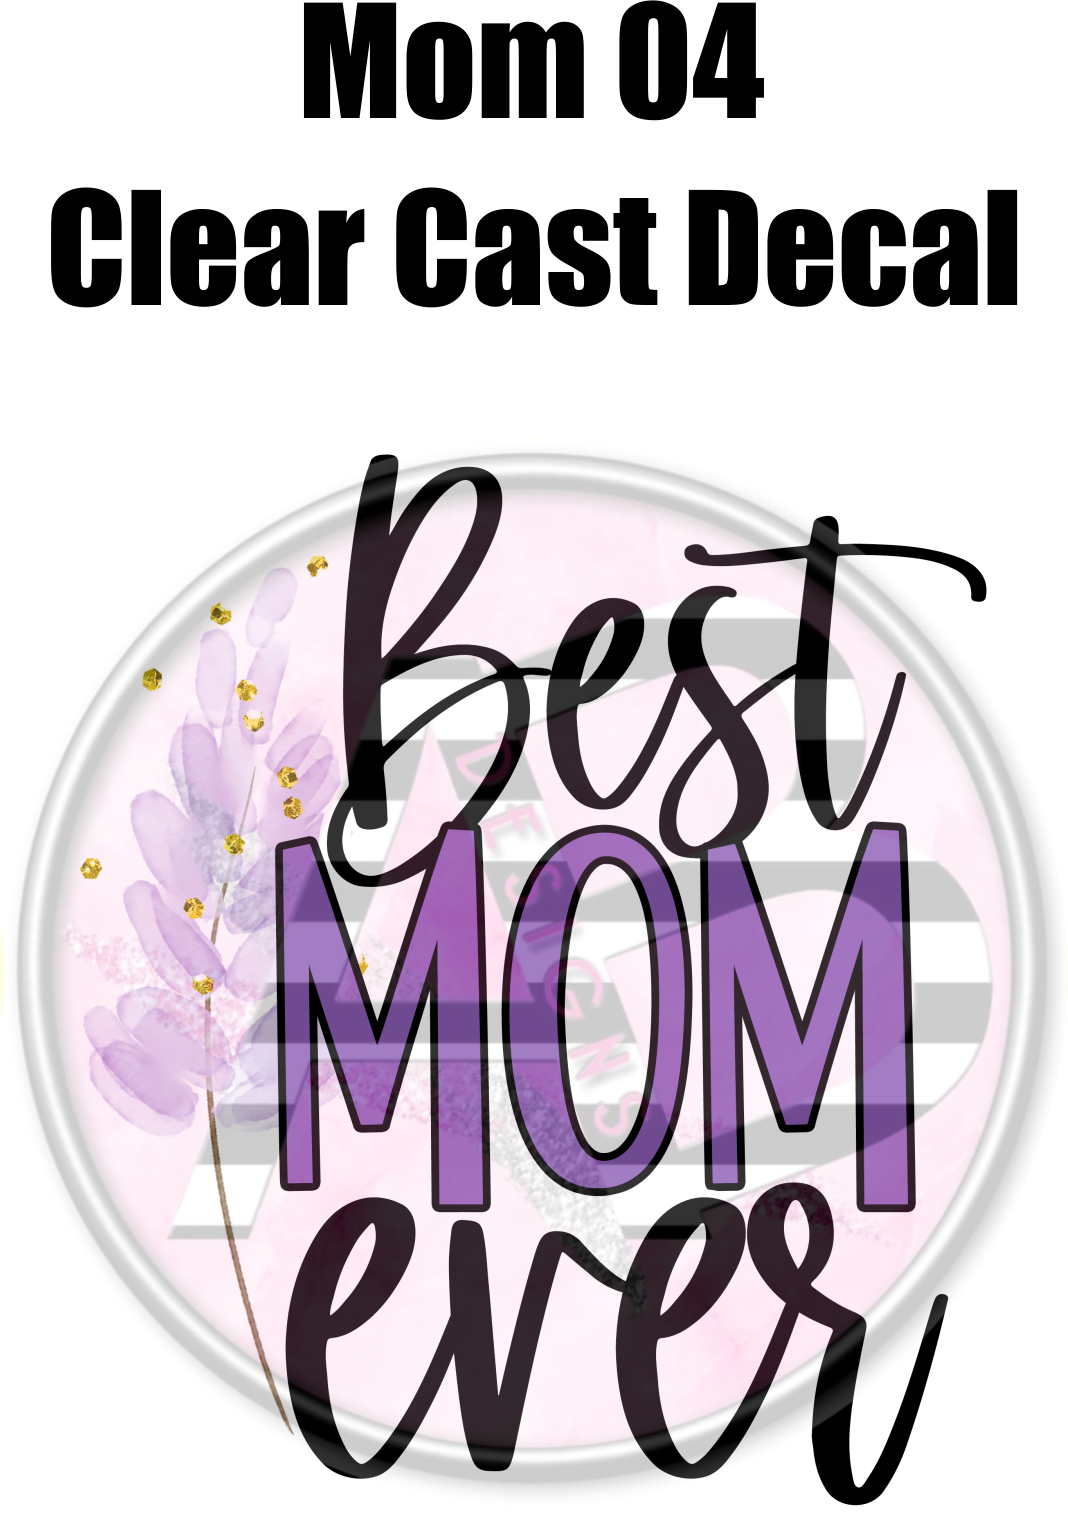 Mom 04 - Clear Cast Decal